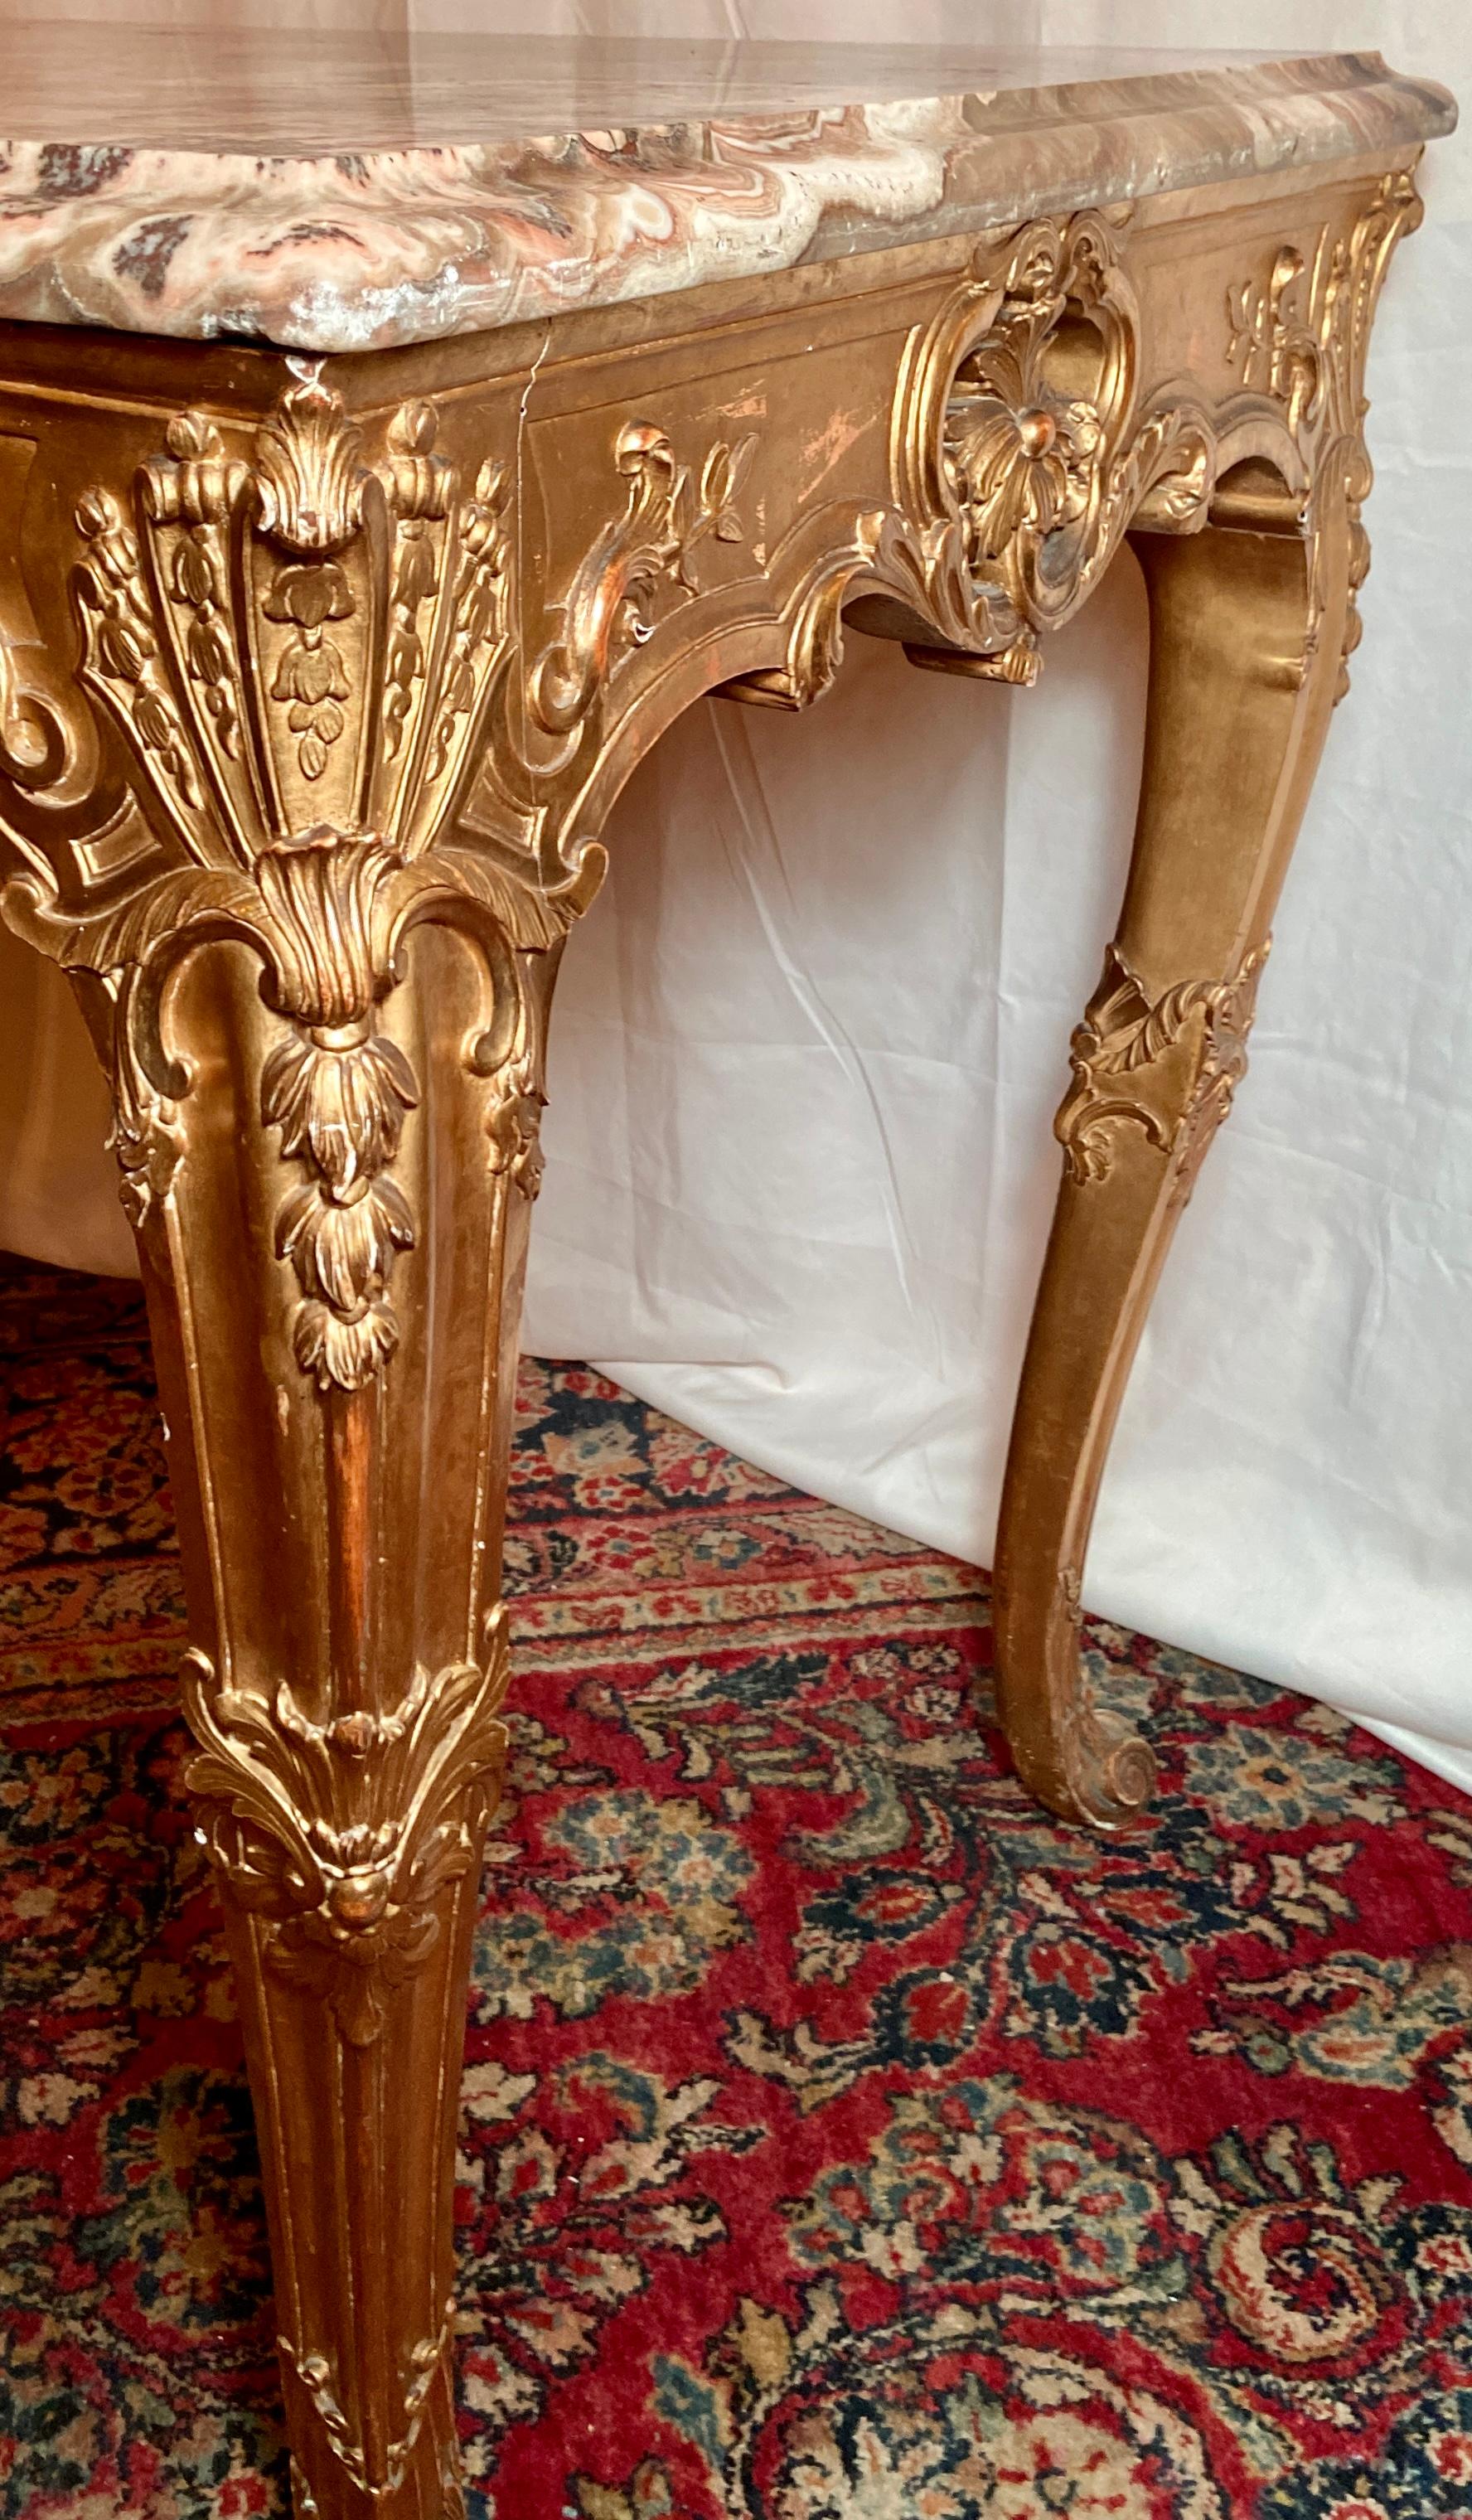 Antique French Régence Gold-Leaf Center Table with Marble Top, Circa 1840-1850 For Sale 2